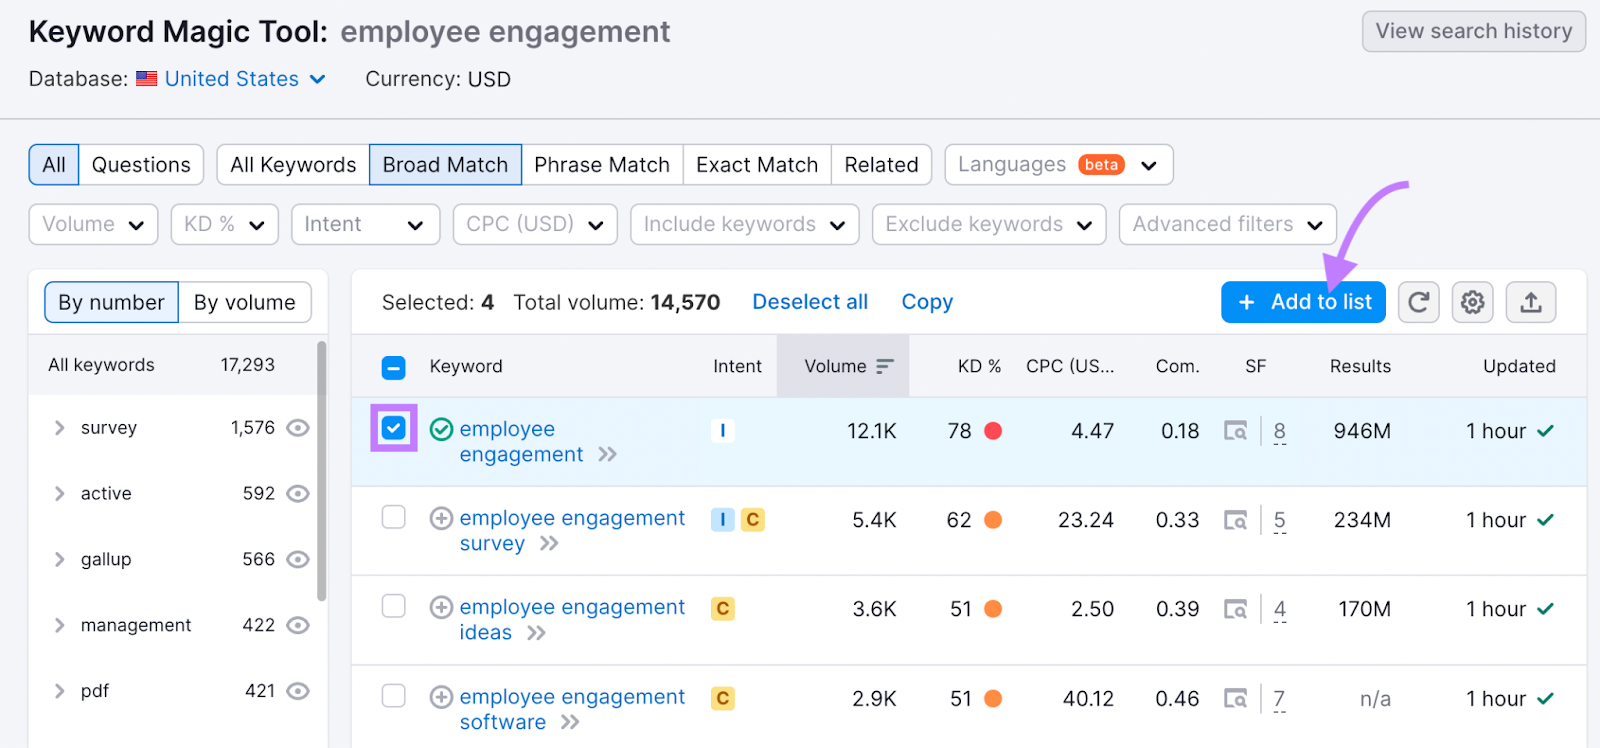 “Add to keyword list" button selected for "employee management" keyword